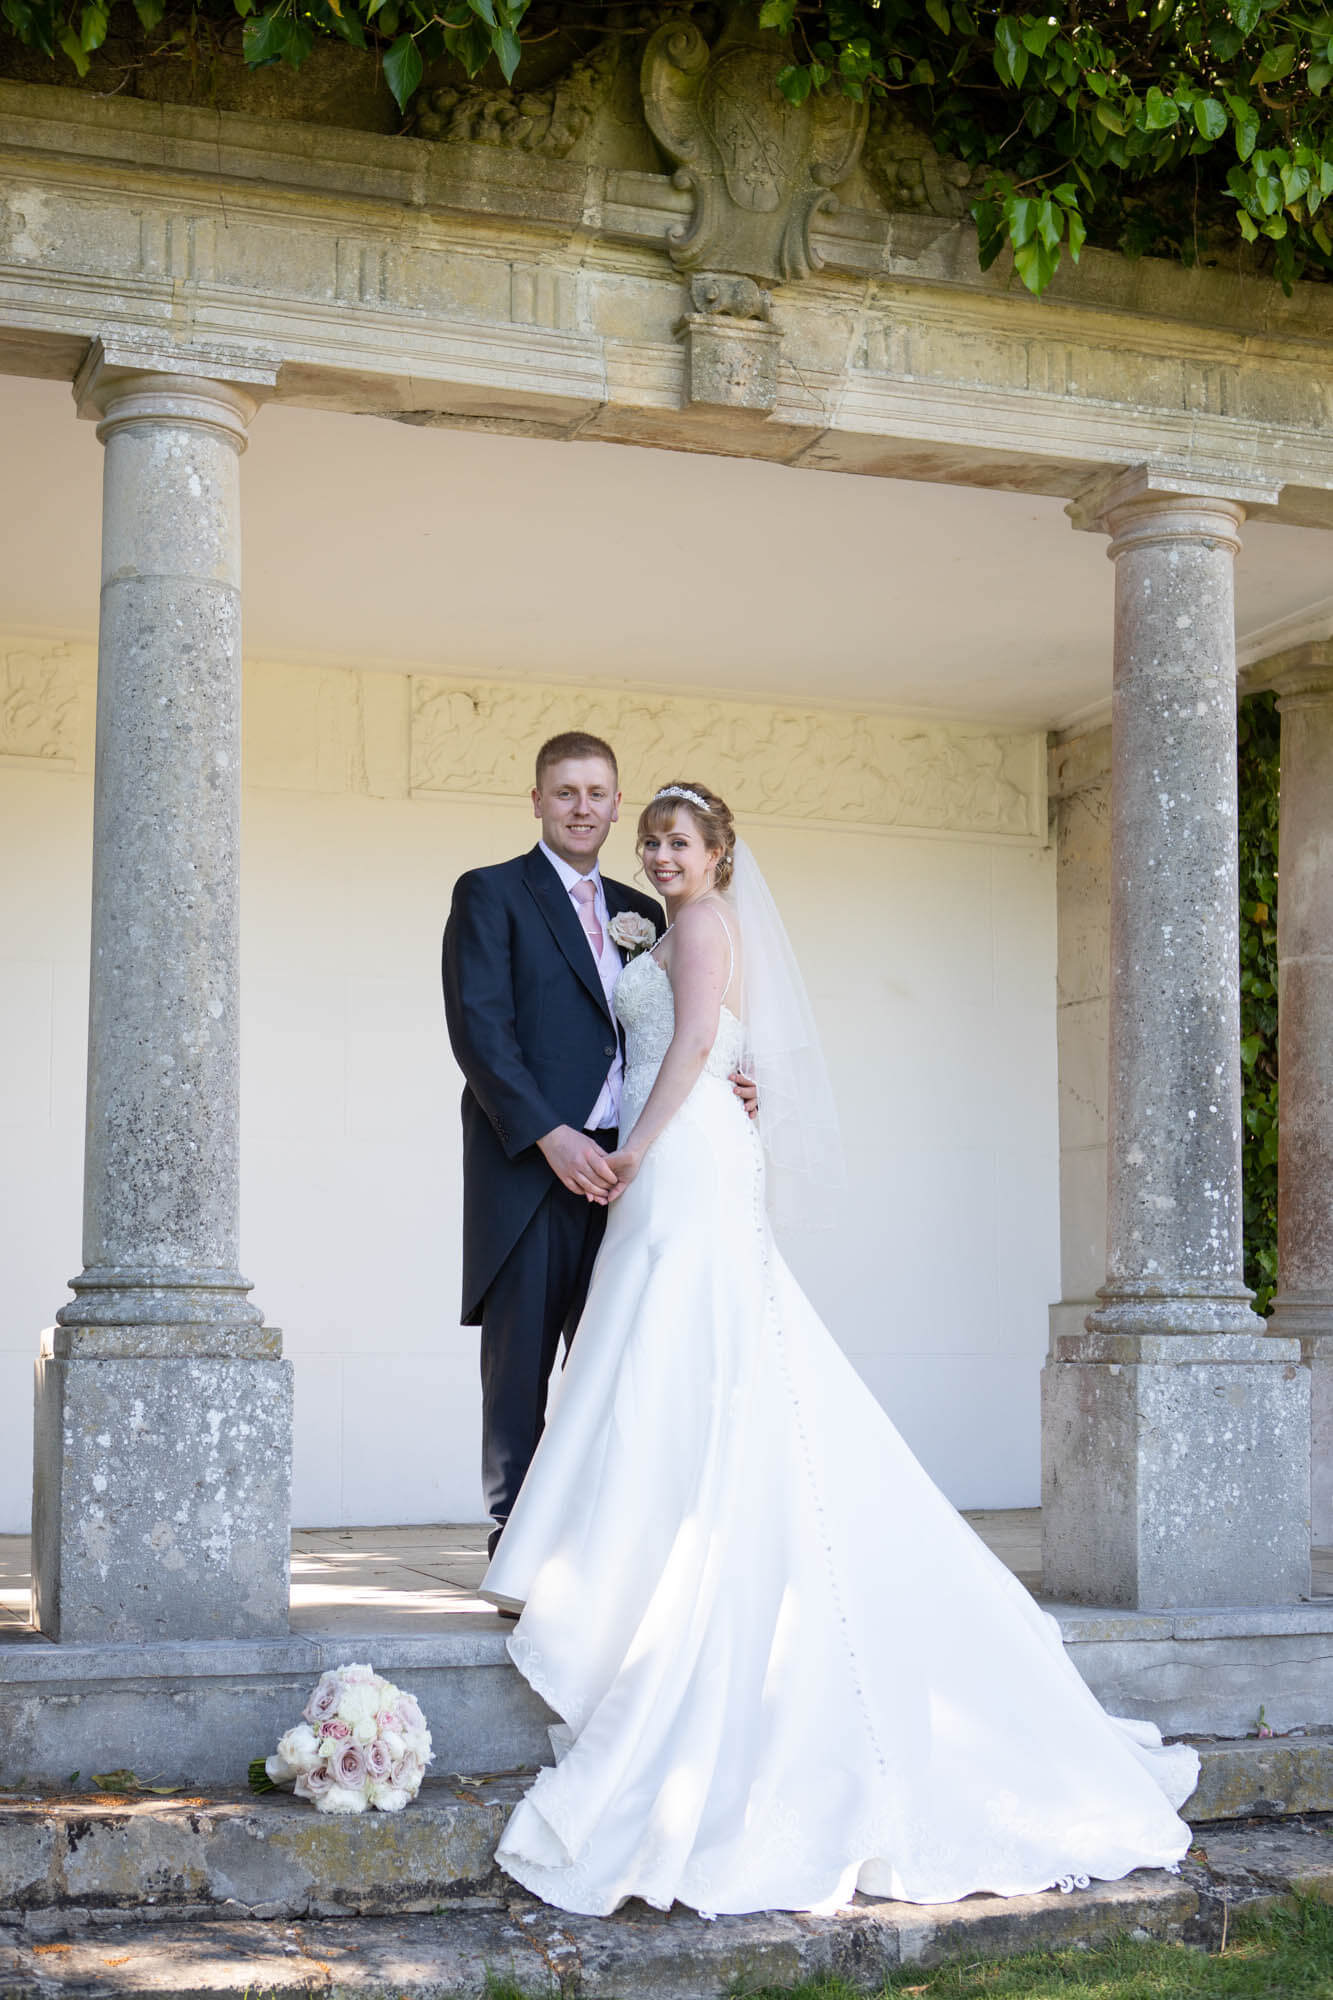 the wedded couple hold hands and stand close together as they stand under the stone pergola